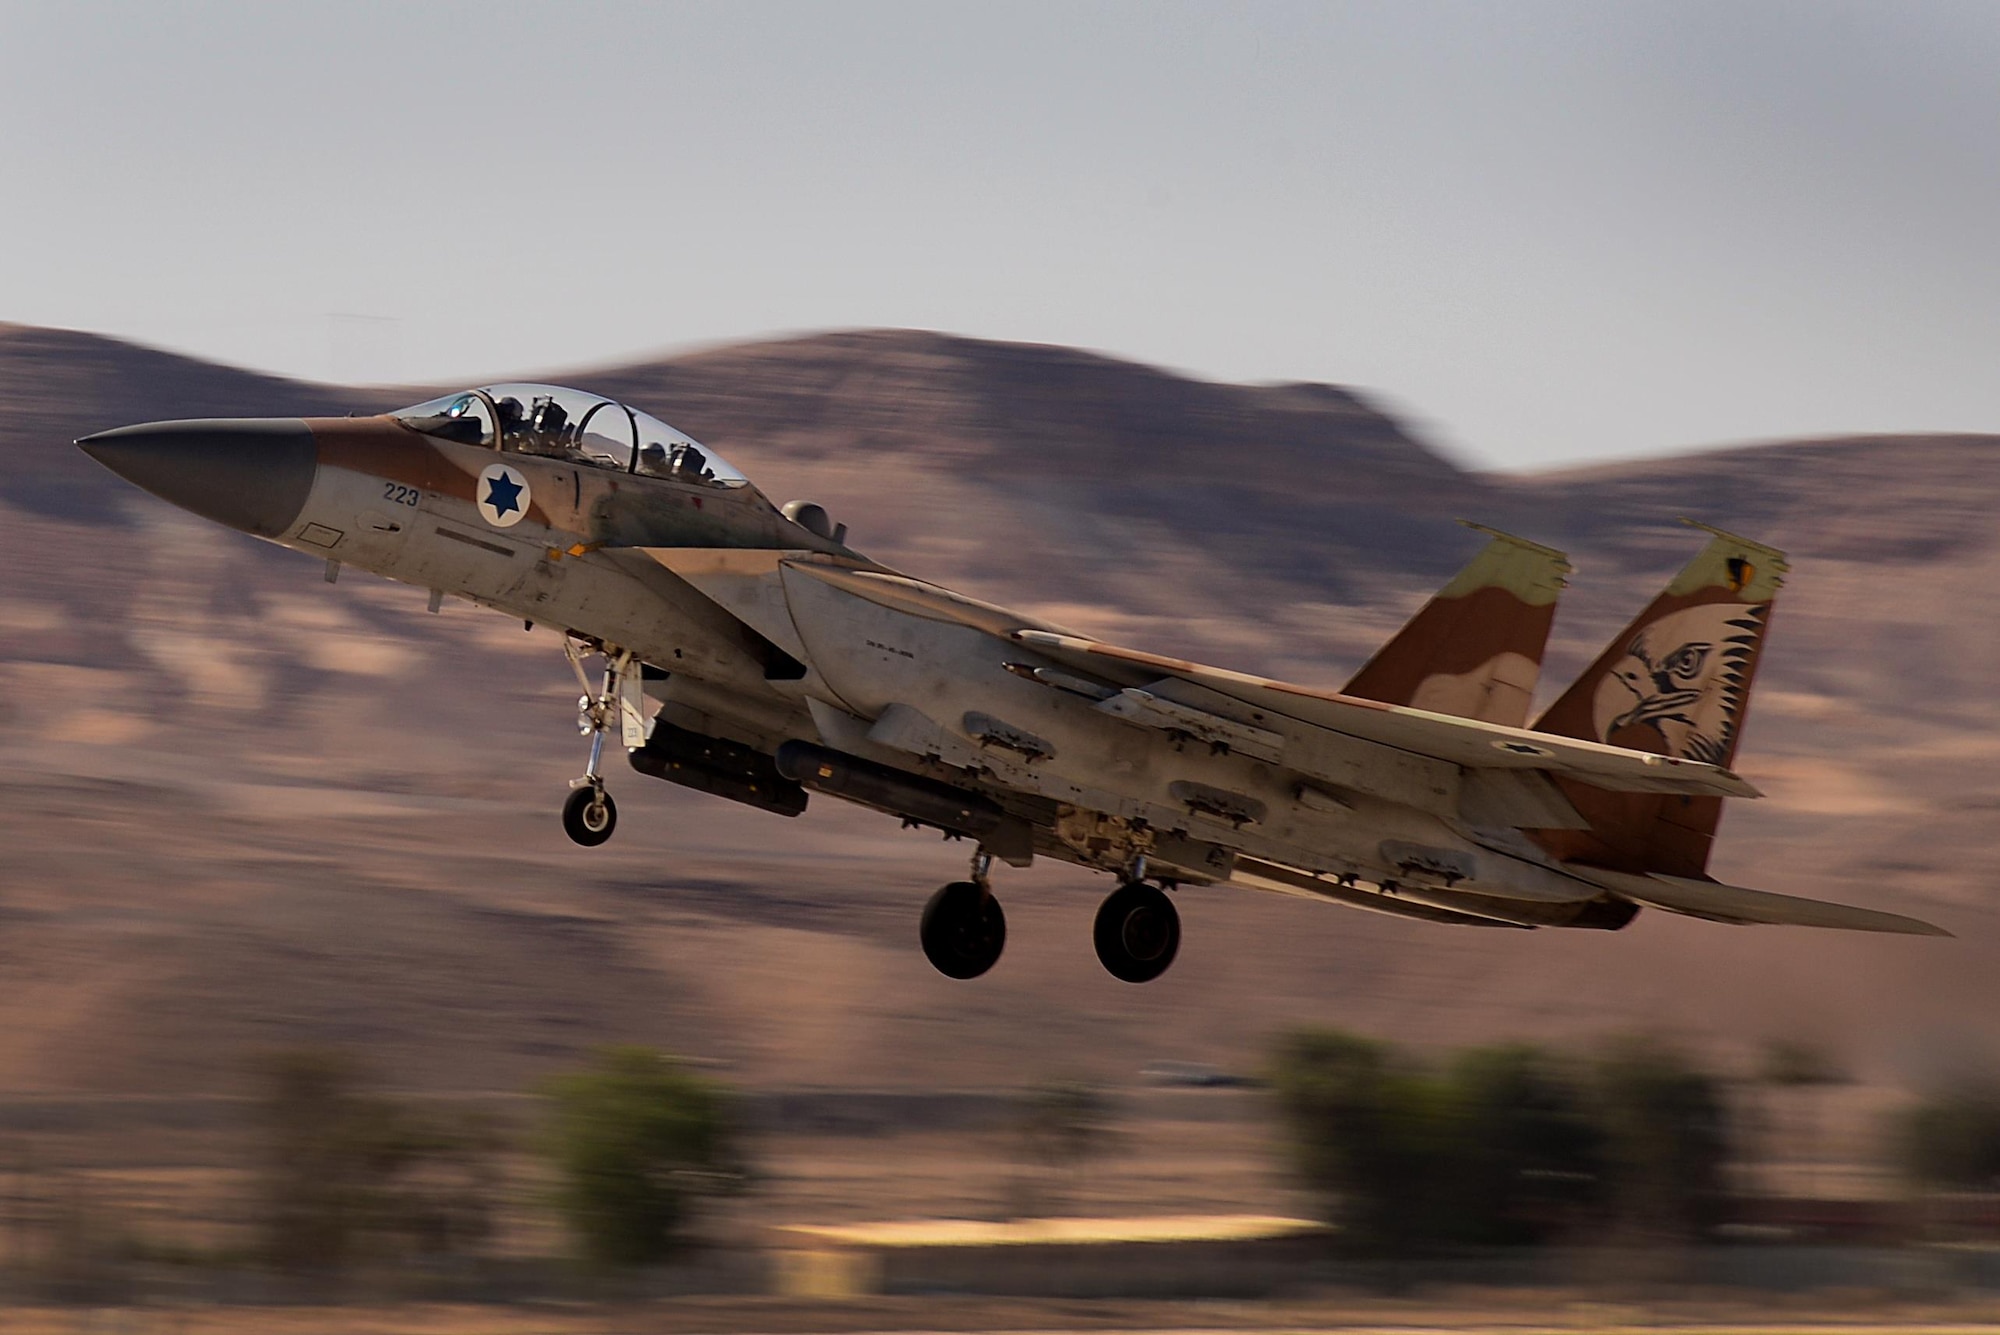 An Israeli F-15I Ra'am assigned to the Sixty Niners launches for a sortie in support of exercise Juniper Falcon May 7, at Uvda Air Base, Israel. Juniper Falcon 17 represents the combination of several bi-lateral component/ Israeli Defense Force exercises that have been executed annually since 2011. These exercises were combined to increase joint training opportunities and capitalize on transportation and cost efficiencies gained by aggregating forces. (U.S. Air Force photo/ Tech. Sgt. Matthew Plew)